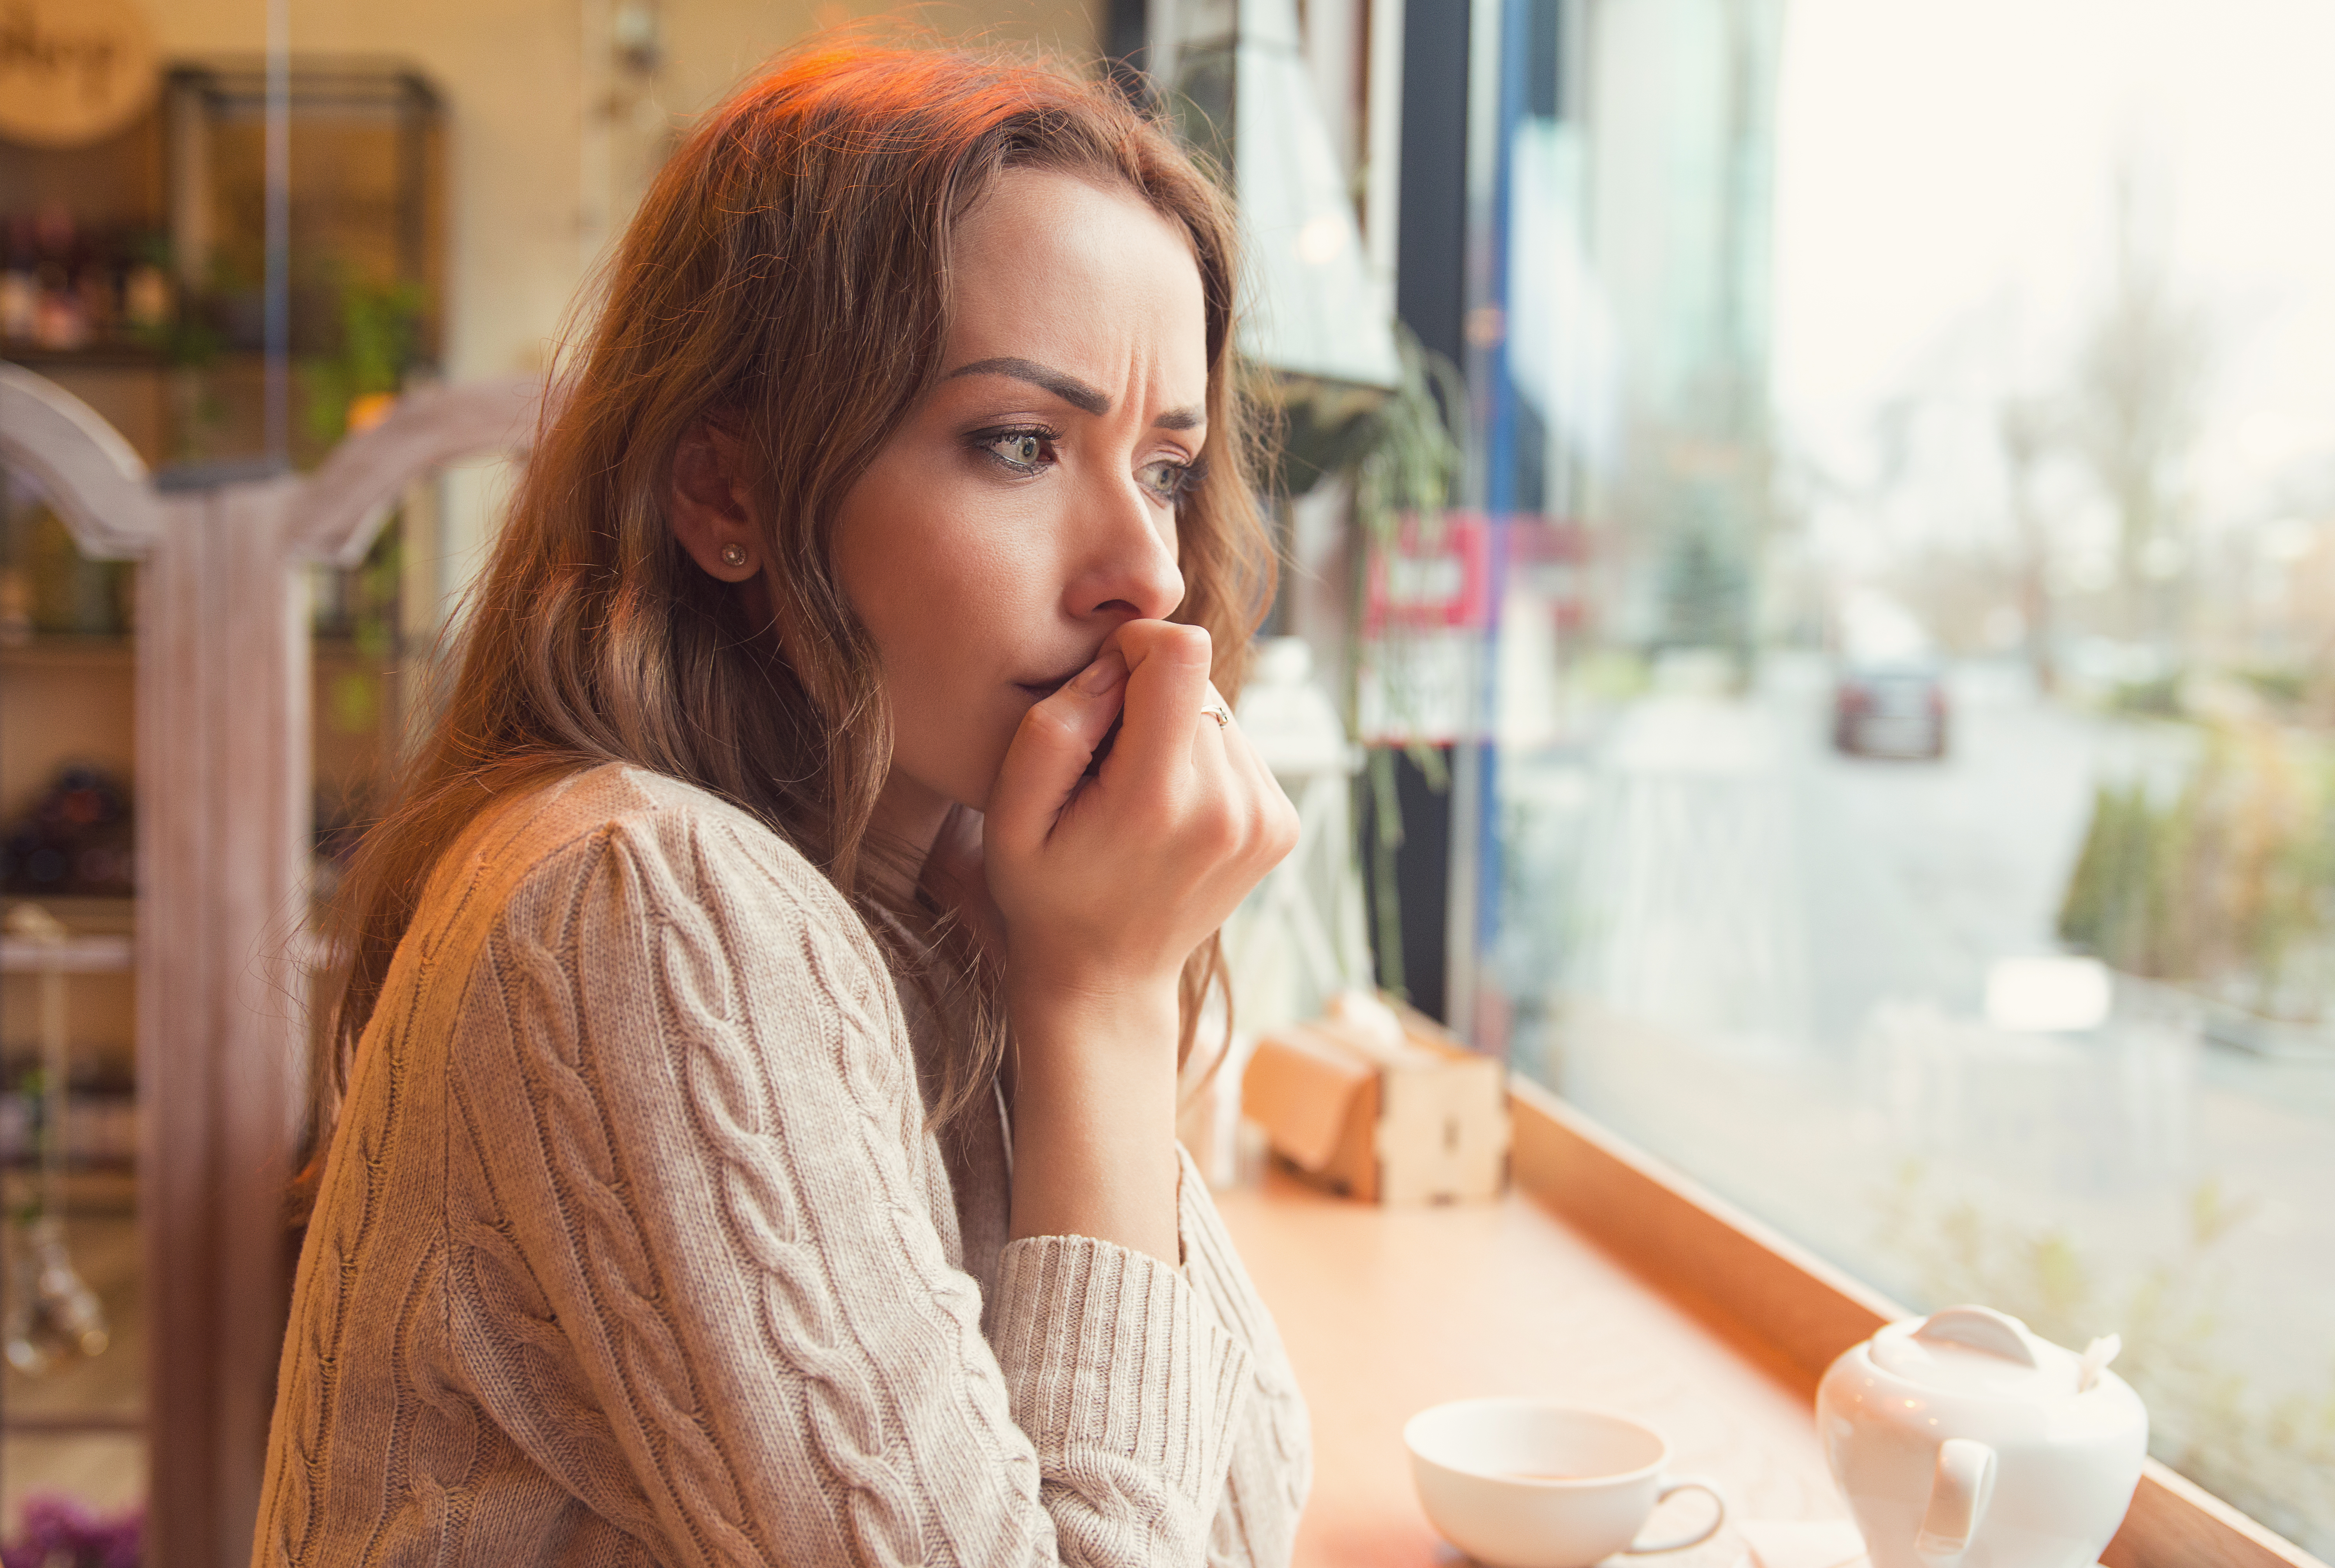 A nervous young woman at a coffee shop | Source: Shutterstock